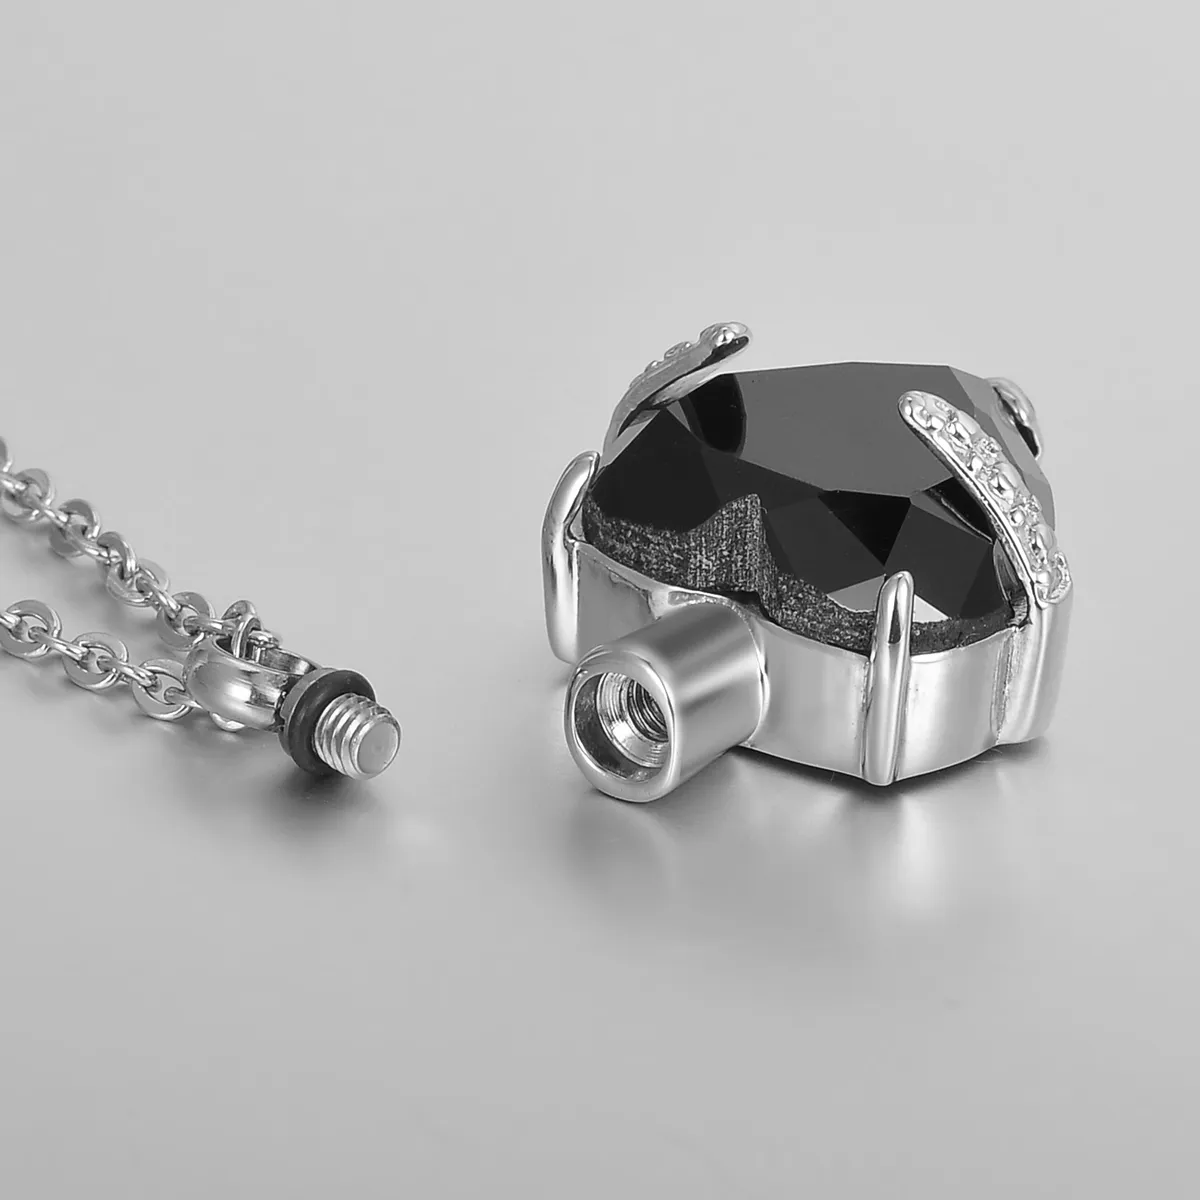 Flyow Cremation Jewelry 925 Sterling Silver Memorial Urn Ashes Keepsake  Cylinder Necklace Pendant (Ball and tree) : Amazon.co.uk: Fashion